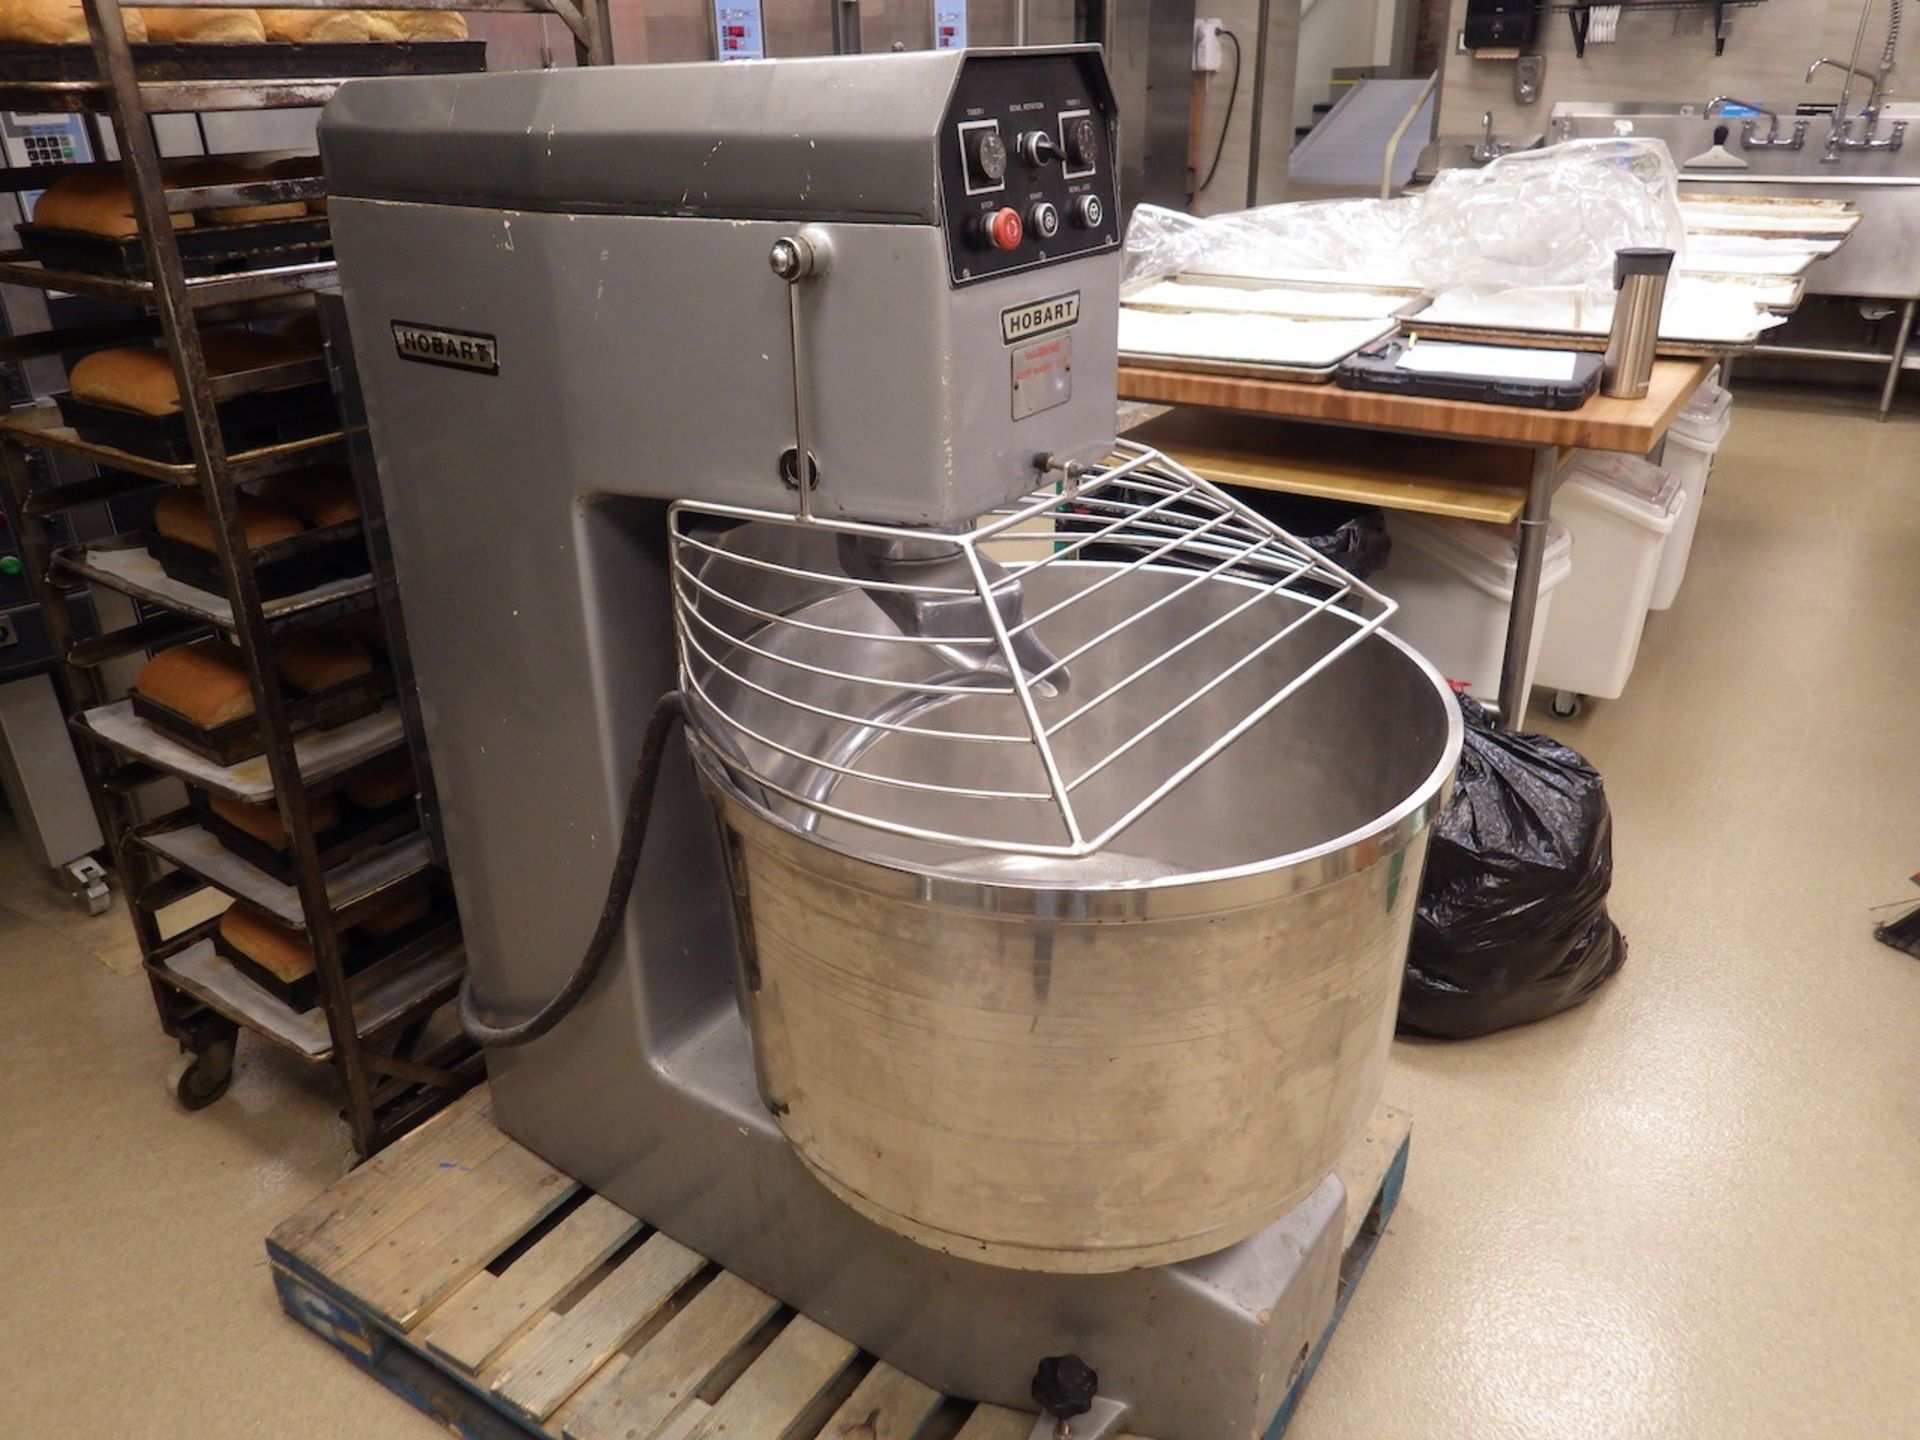 Hobart 190 Qt. Spiral Mixer, Model HF270, S/N 80-001439 with Hook Attachment and Guard, 220 V, 60